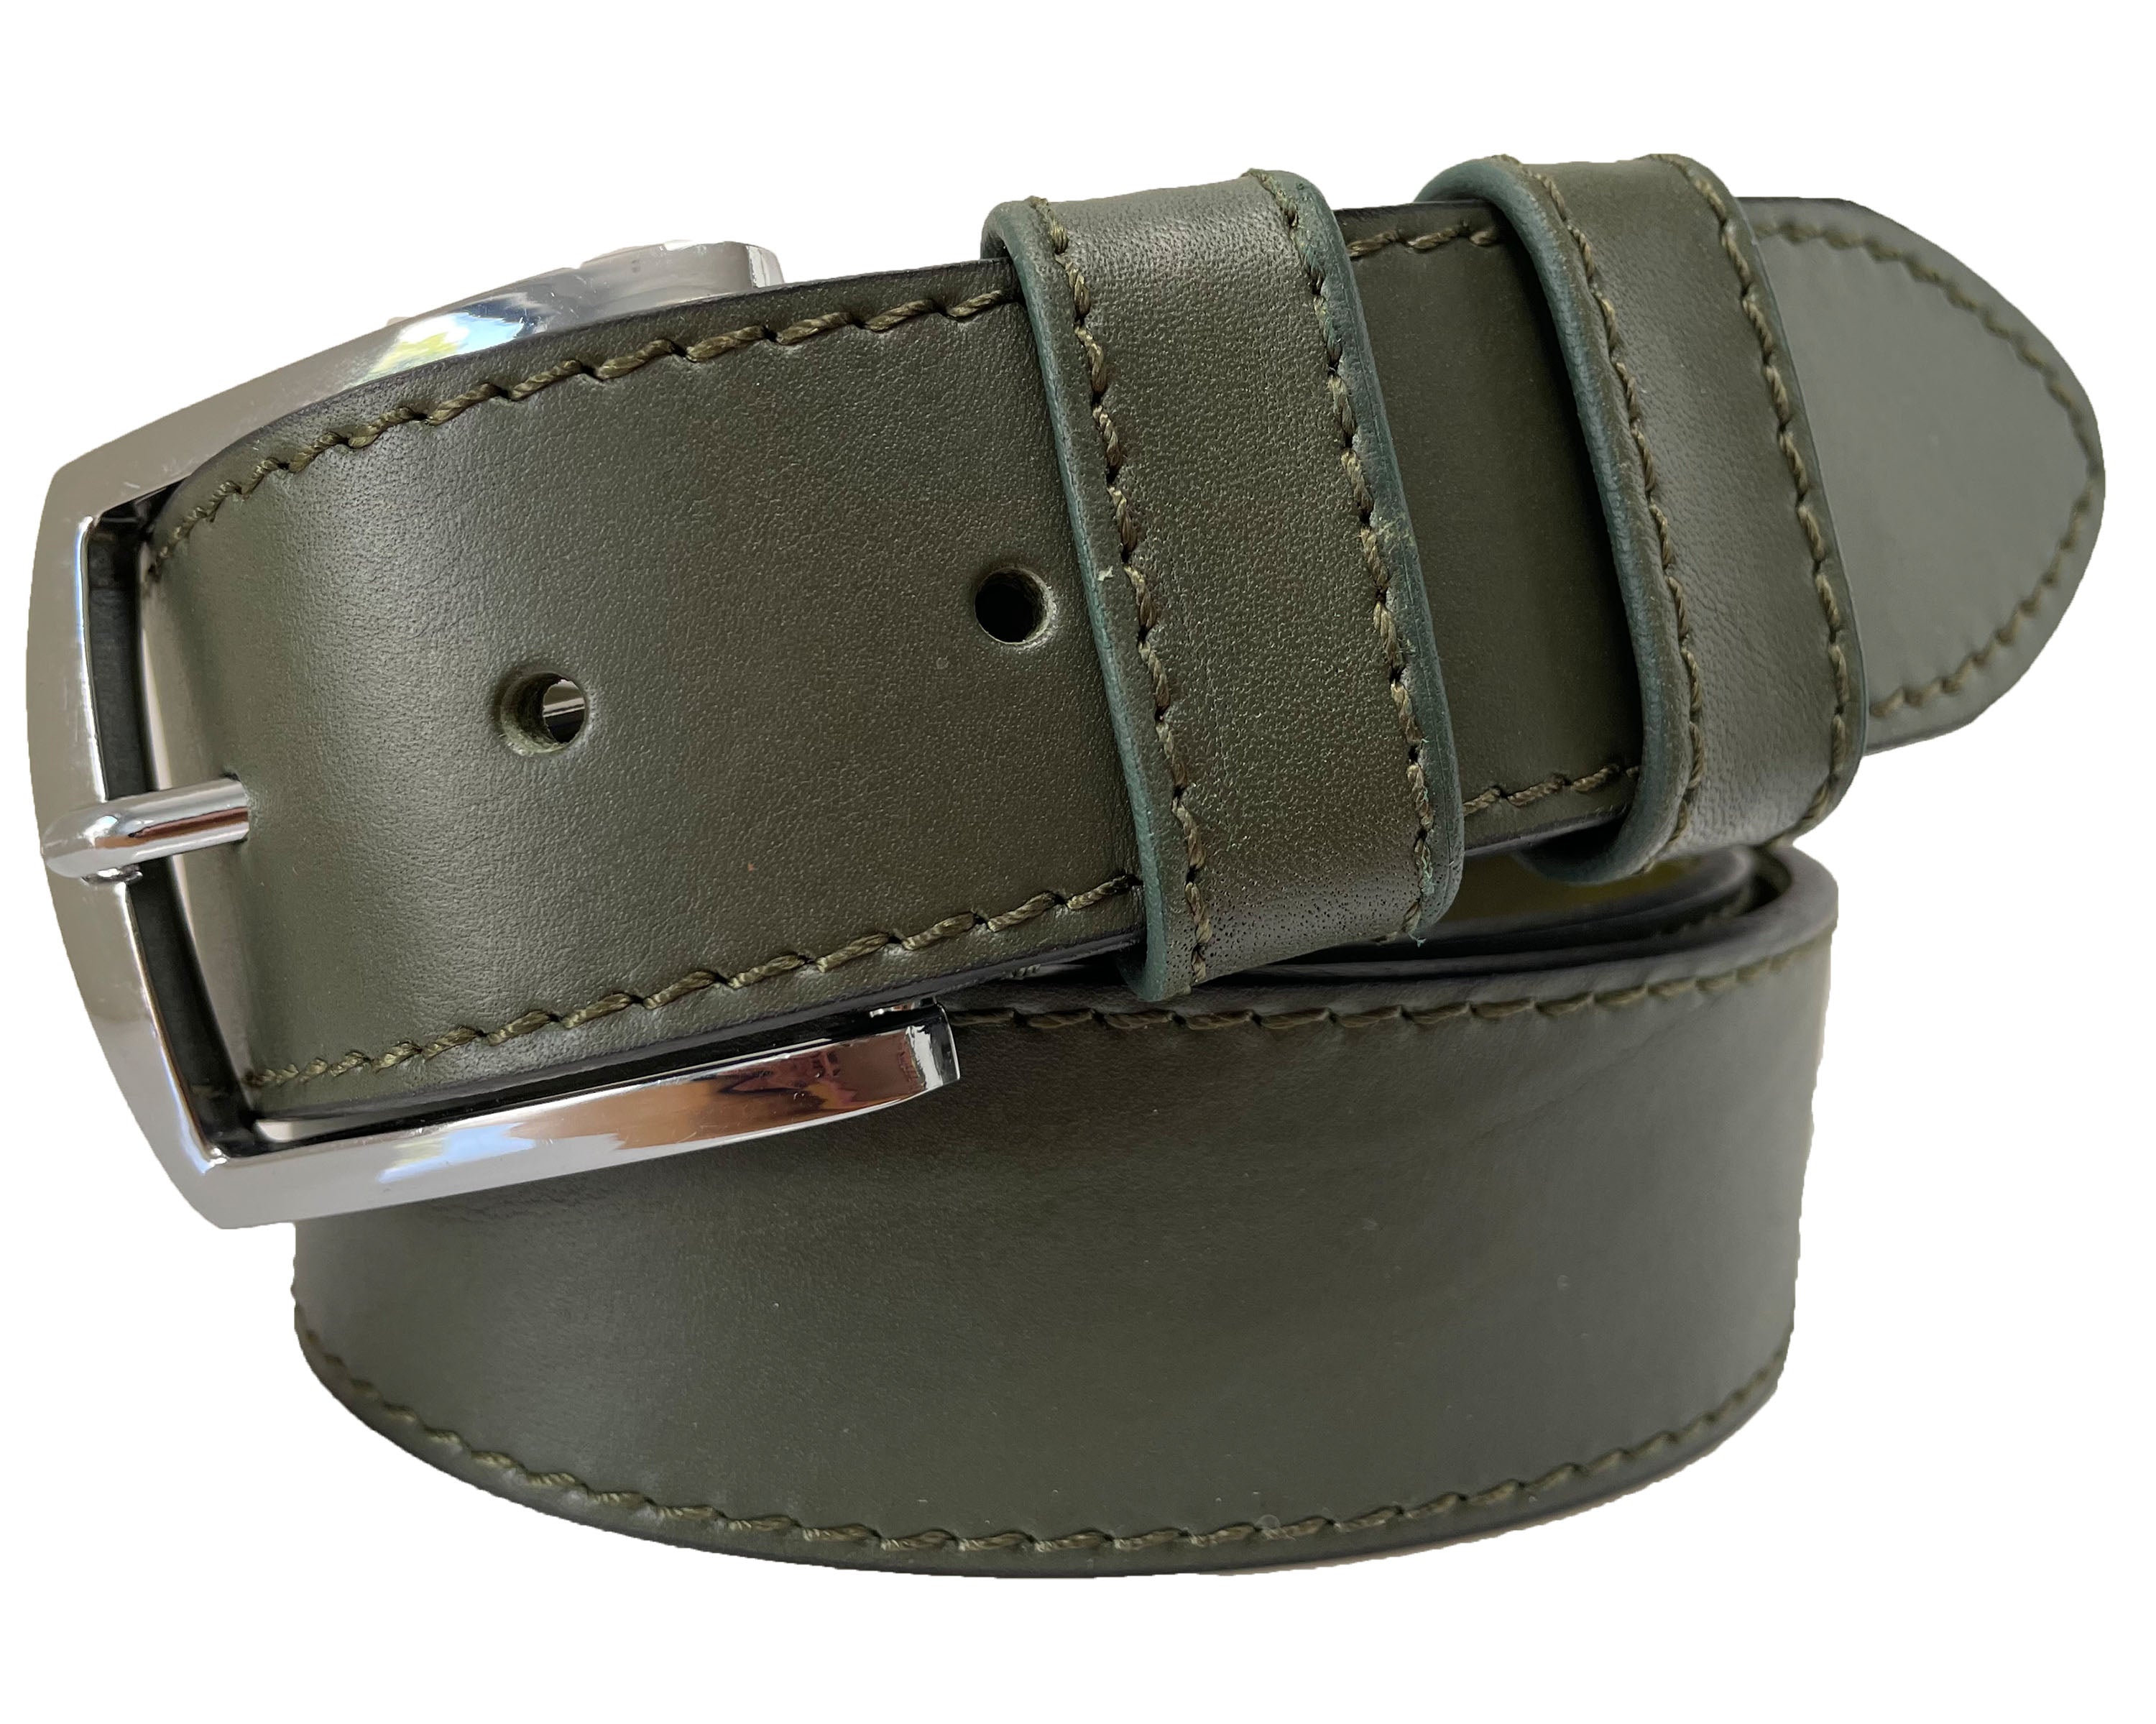 MILITARY GREEN 40MM SINGLE STITCHED HIDE LEATHER BELT